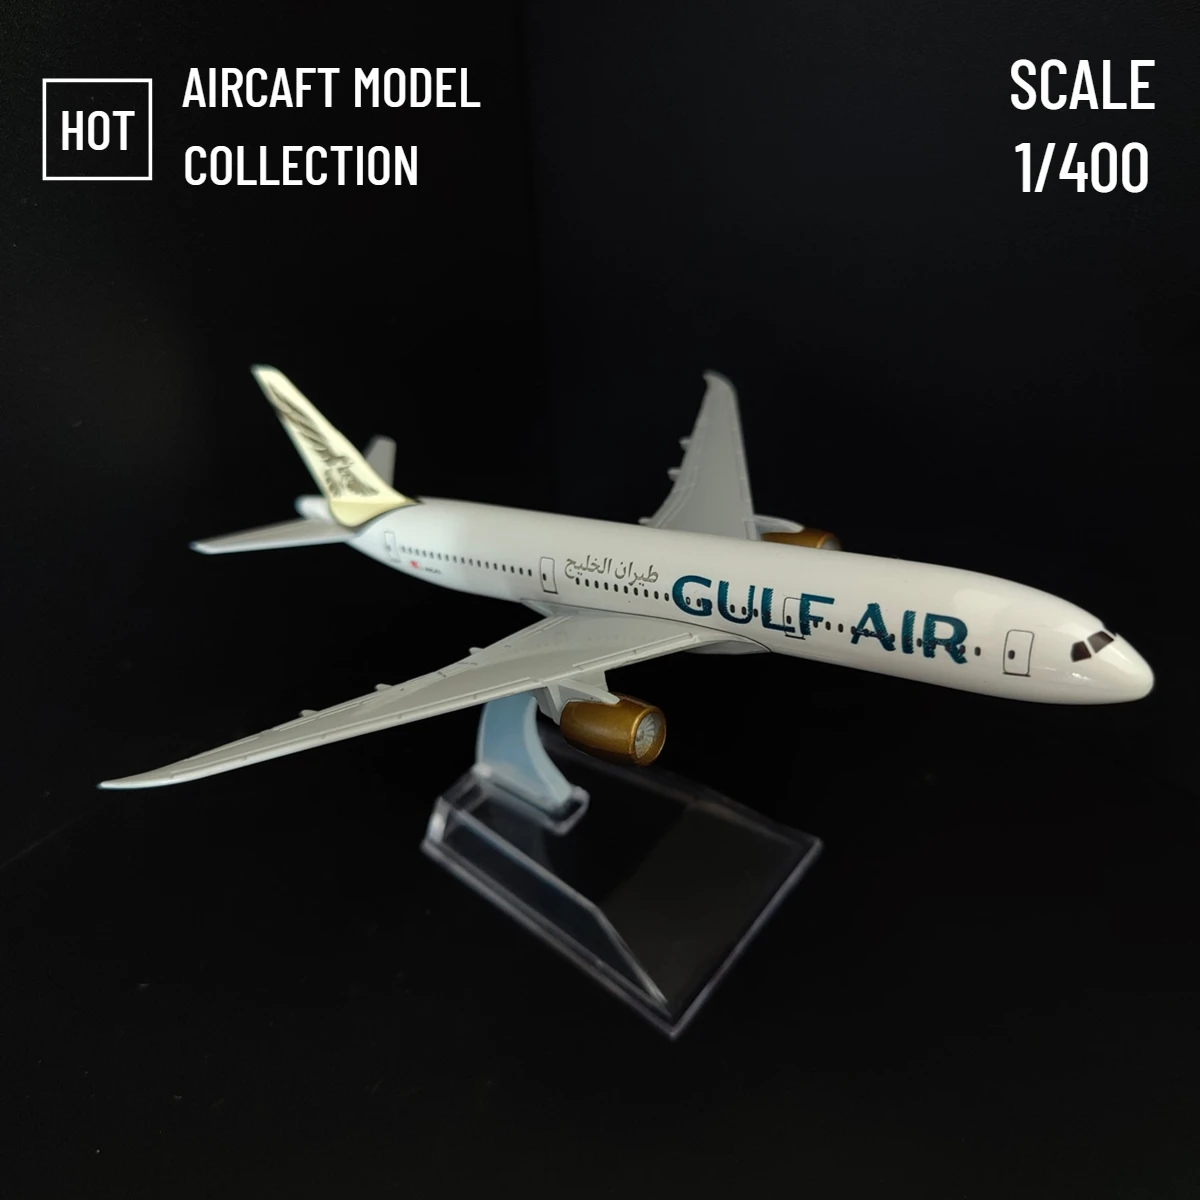 

Scale 1:400 Metal Aviation Replica Gulf Air B787 Aircraft Model Diecast Airplane Miniature Xmas Kids Room Decor Gift Toy for Boy